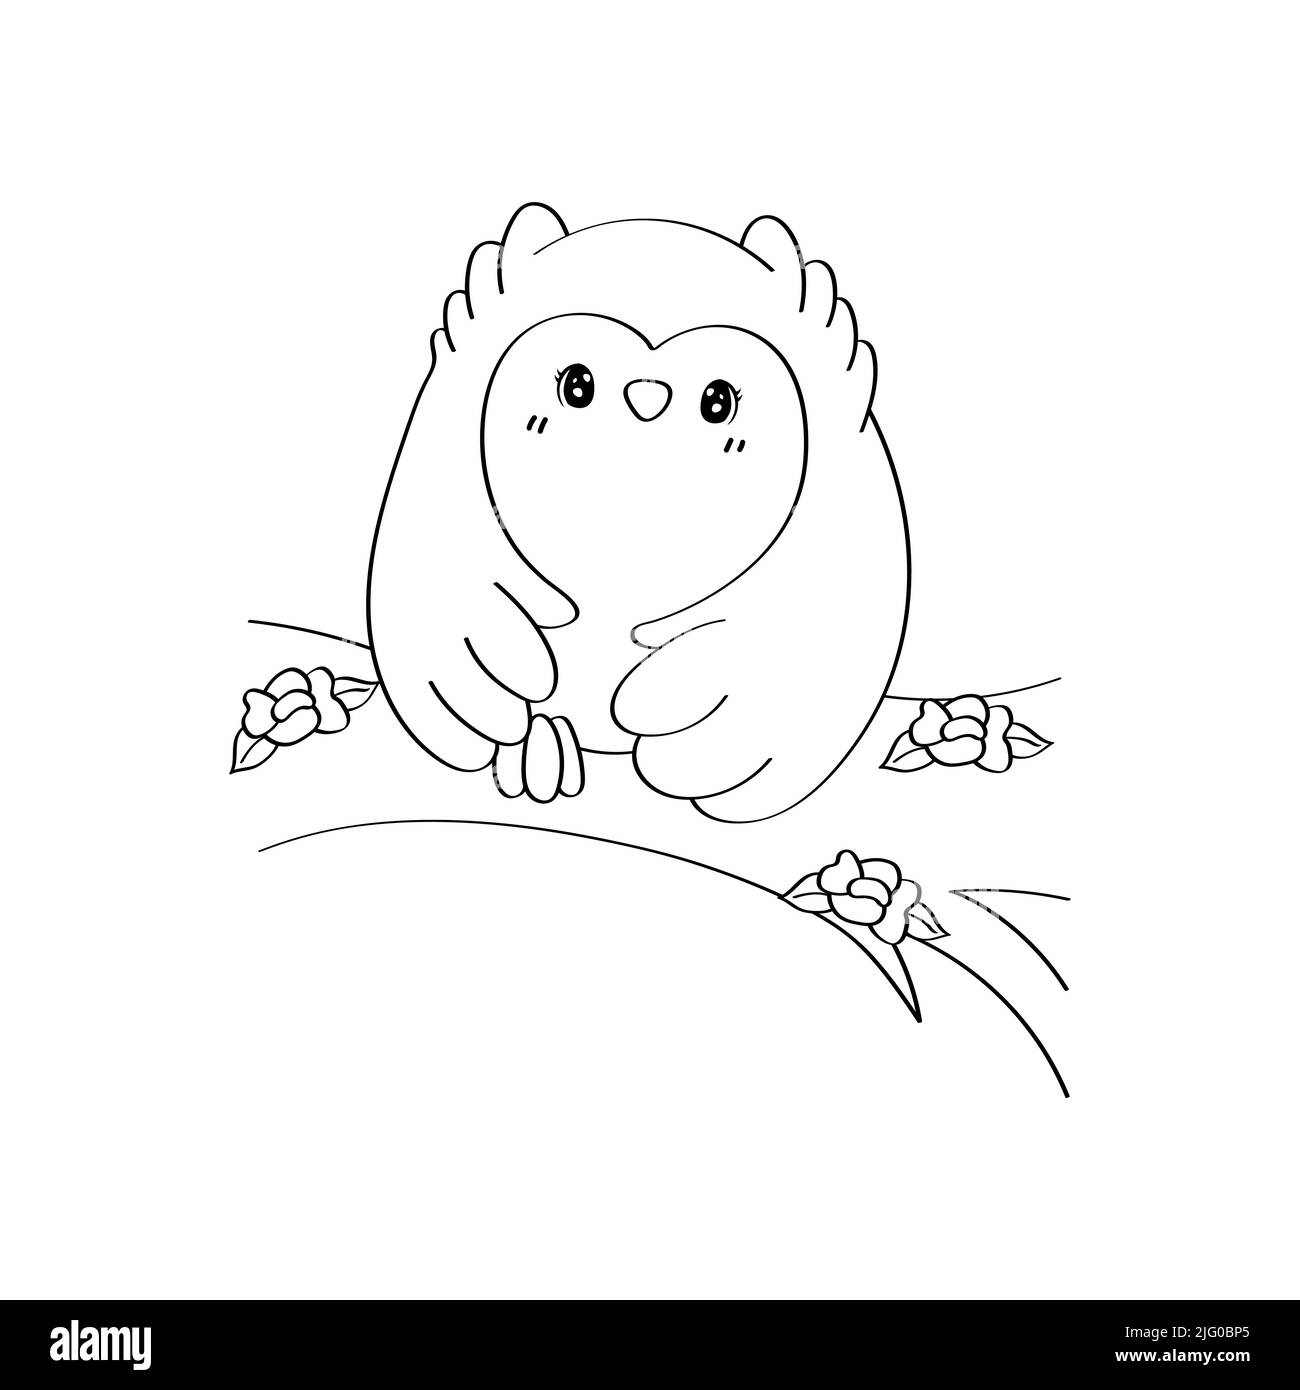 Cute Clipart Owl Black and White Illustration in Cartoon Style. Cartoon Clip Art Coloring Page Owl Sitting on a Tree. Vector Illustration of a Bird Stock Vector